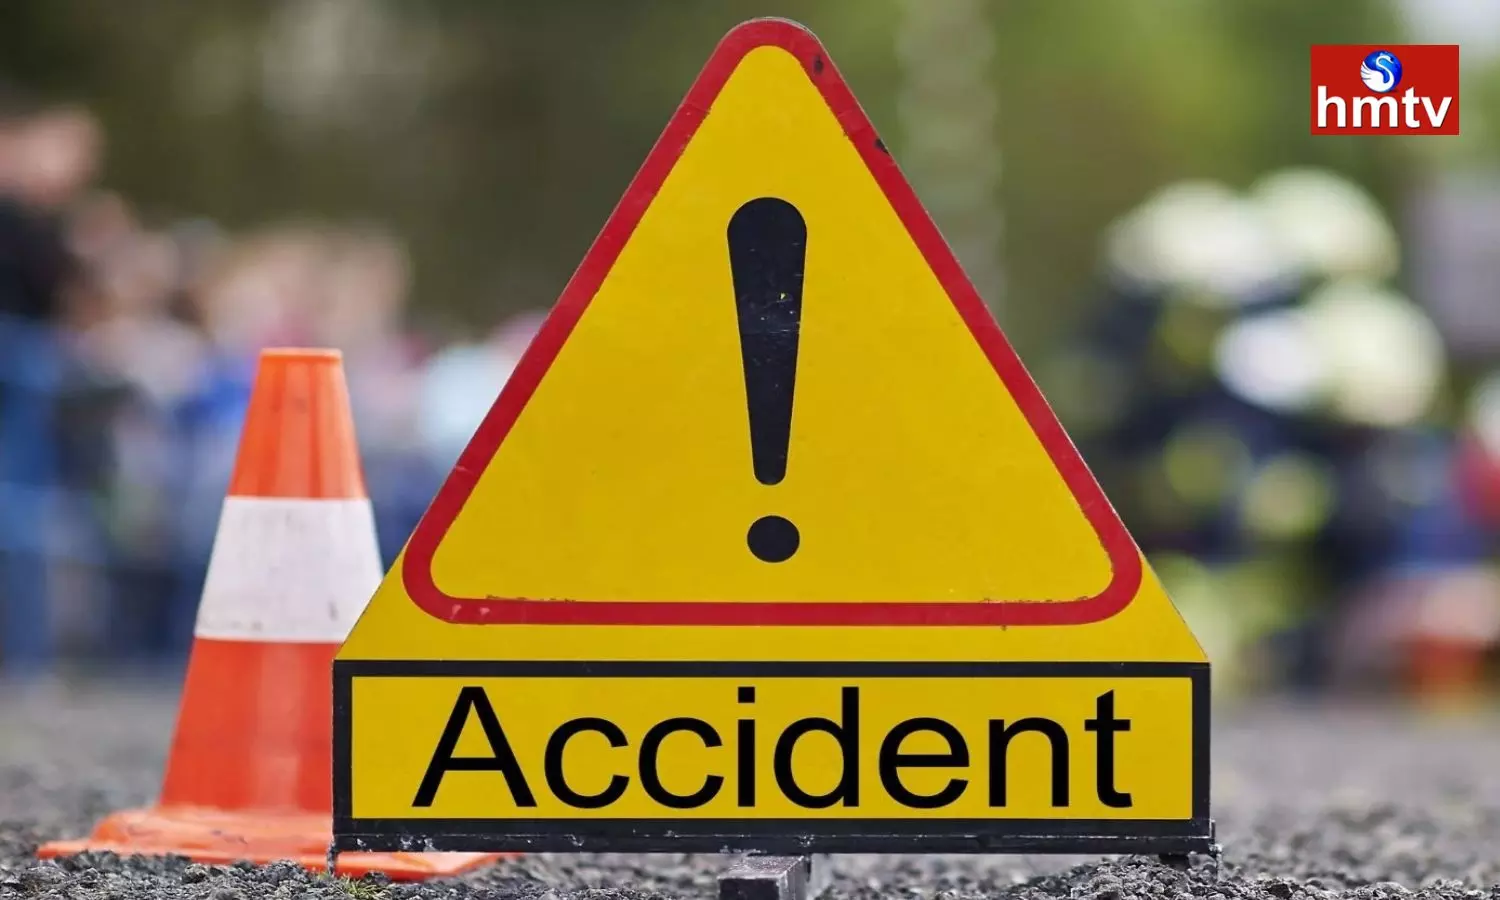 a fatal accident took place near pedda amberpet orr in hyderabad